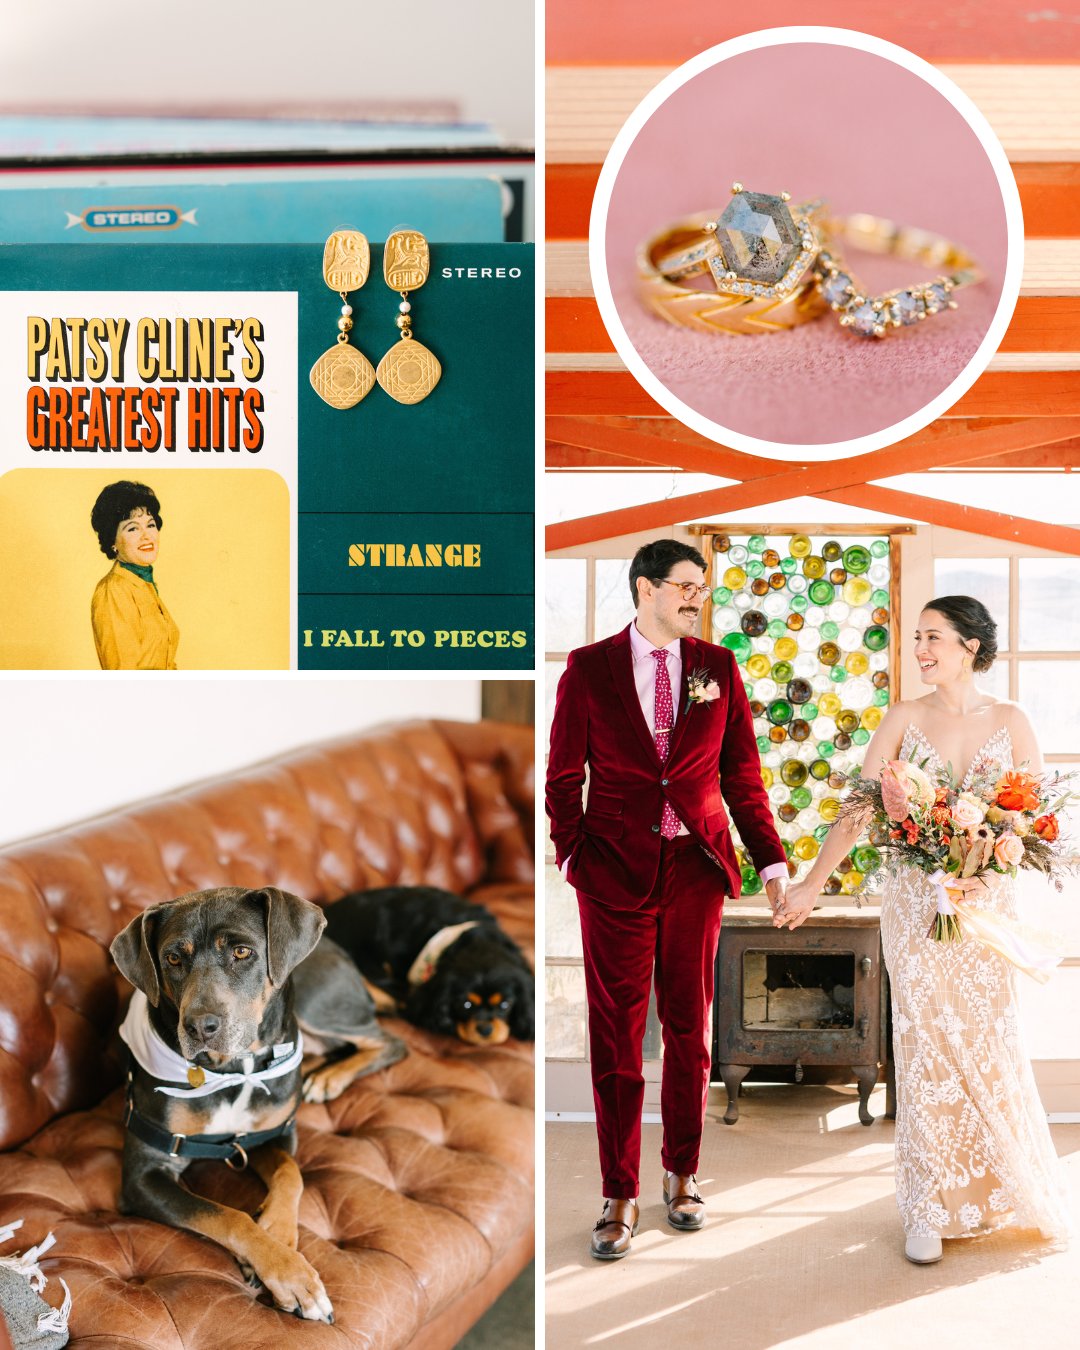 A wedding collage featuring a dog and a record, jewelry, and the couple's first look